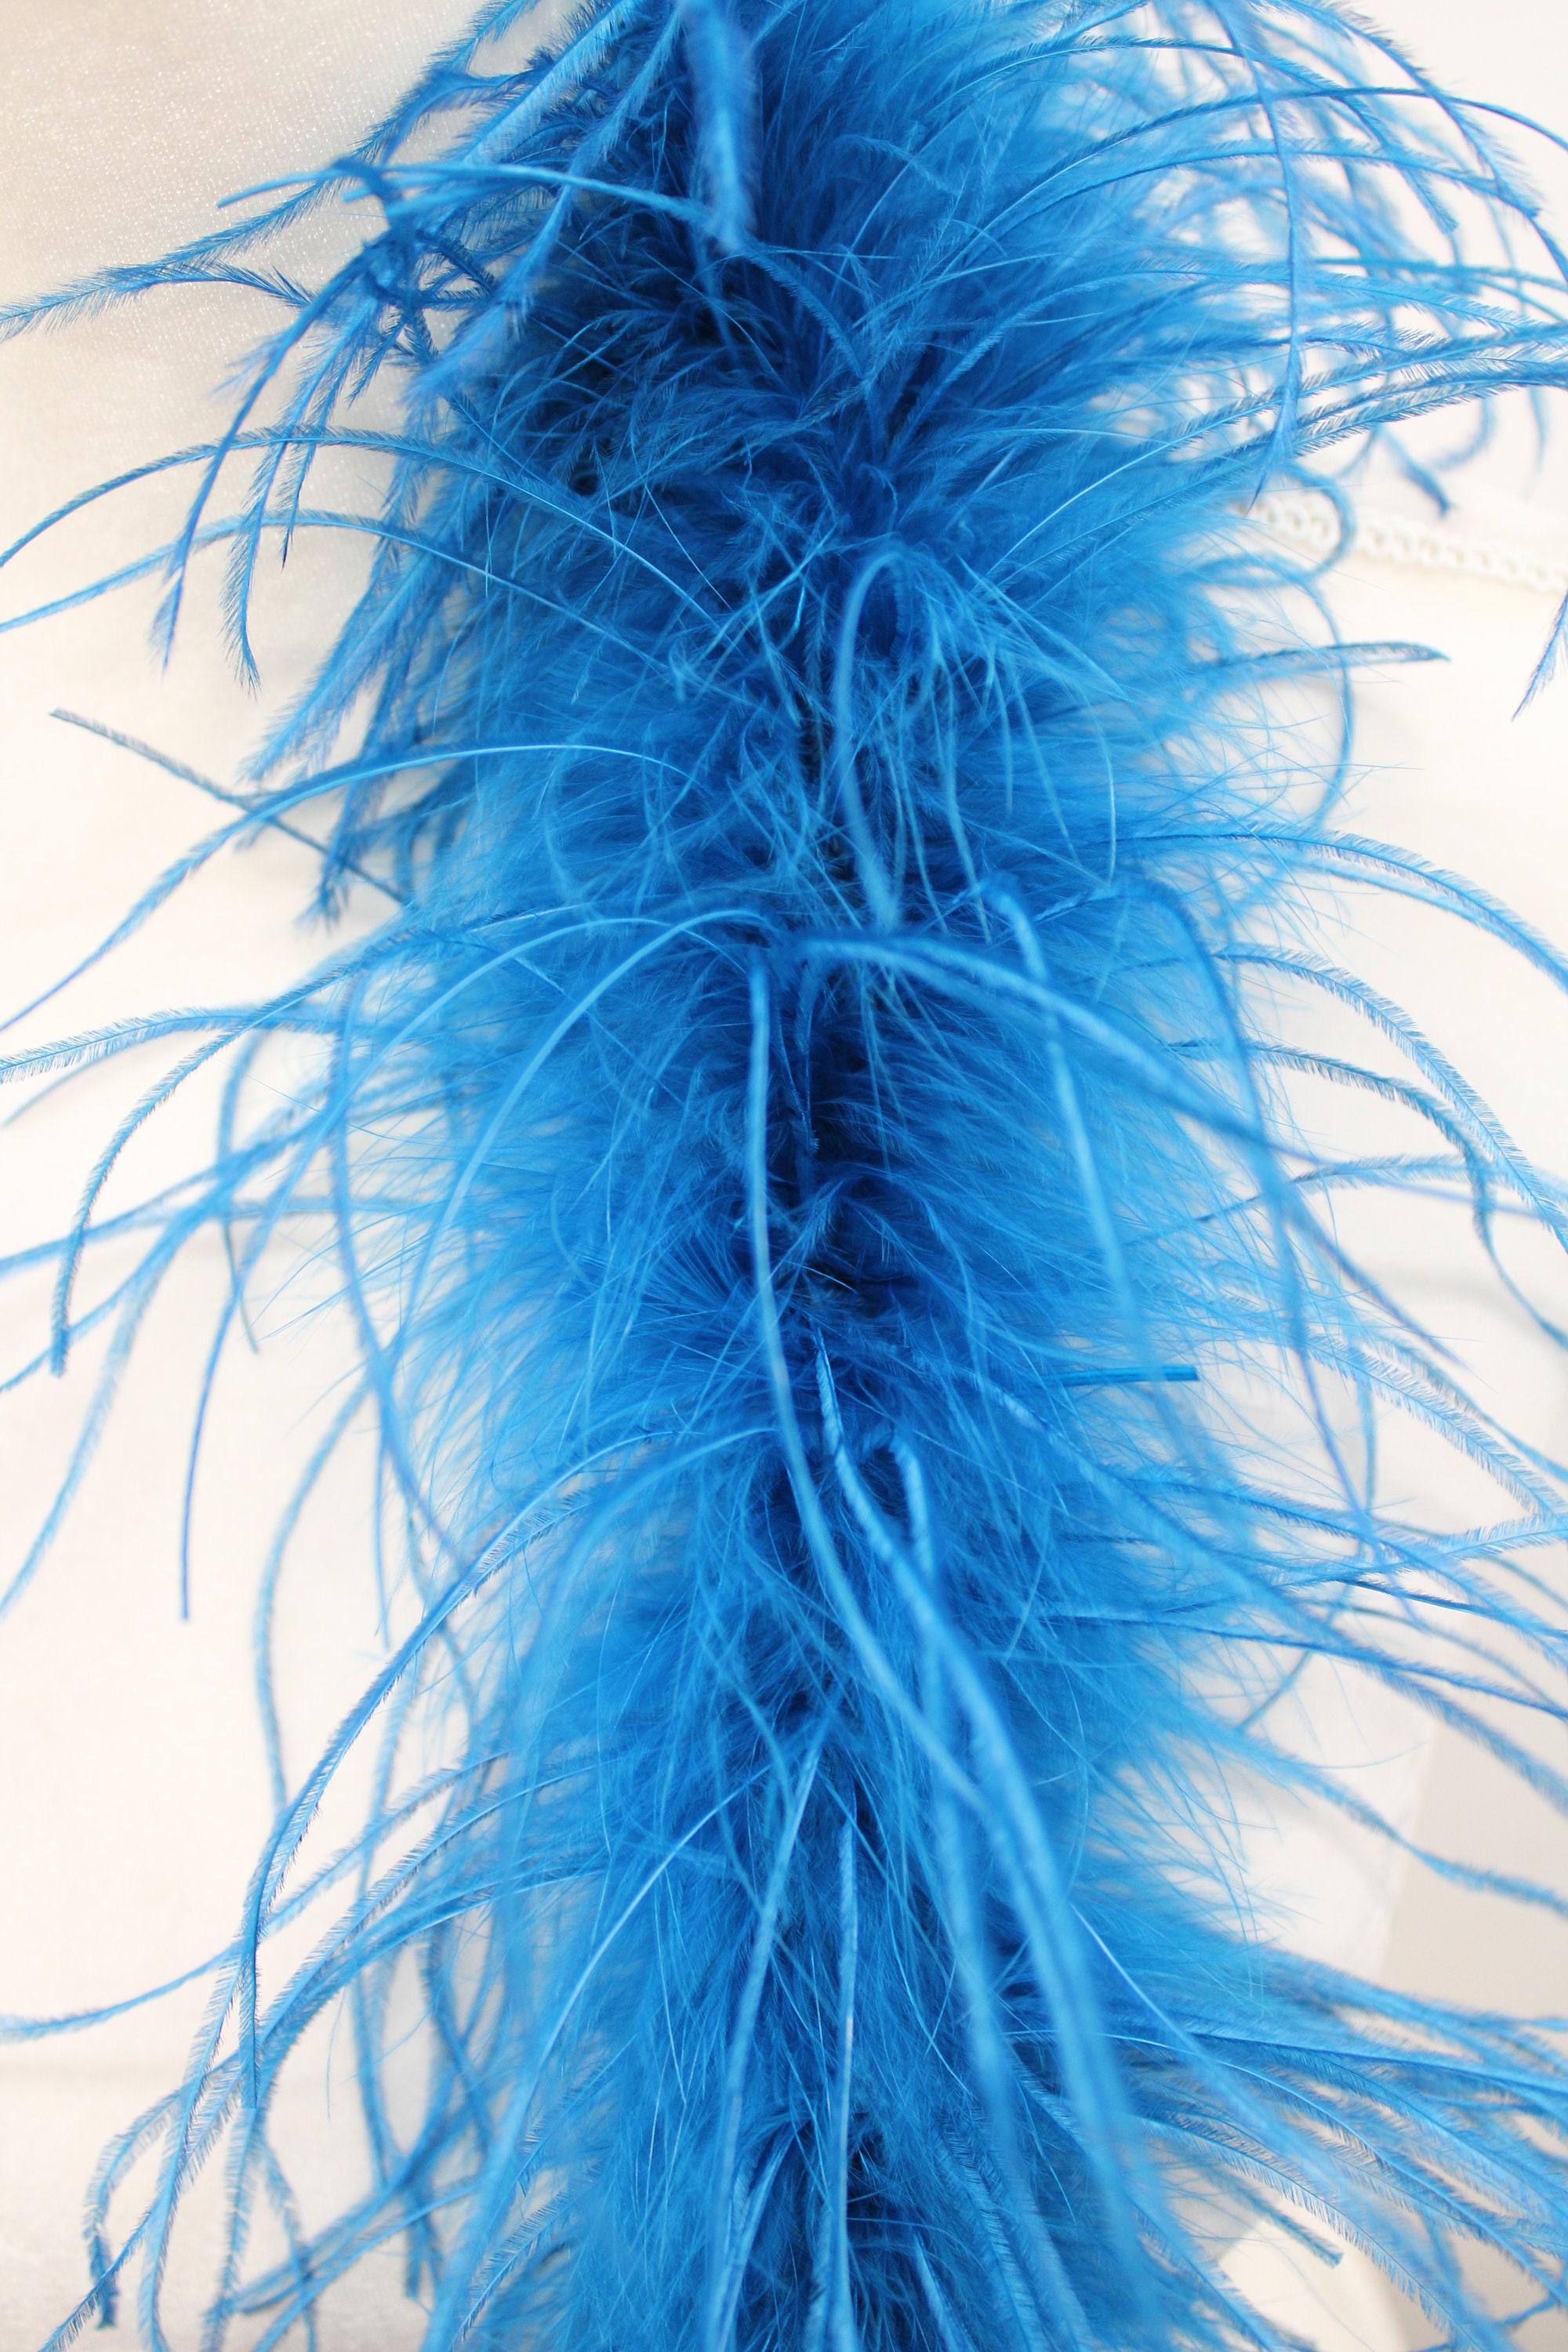 2 Ply Ostrich Feather Boa 2 Yards for Halloween Costume Bachelorette Party  DIY (Baby Blue)